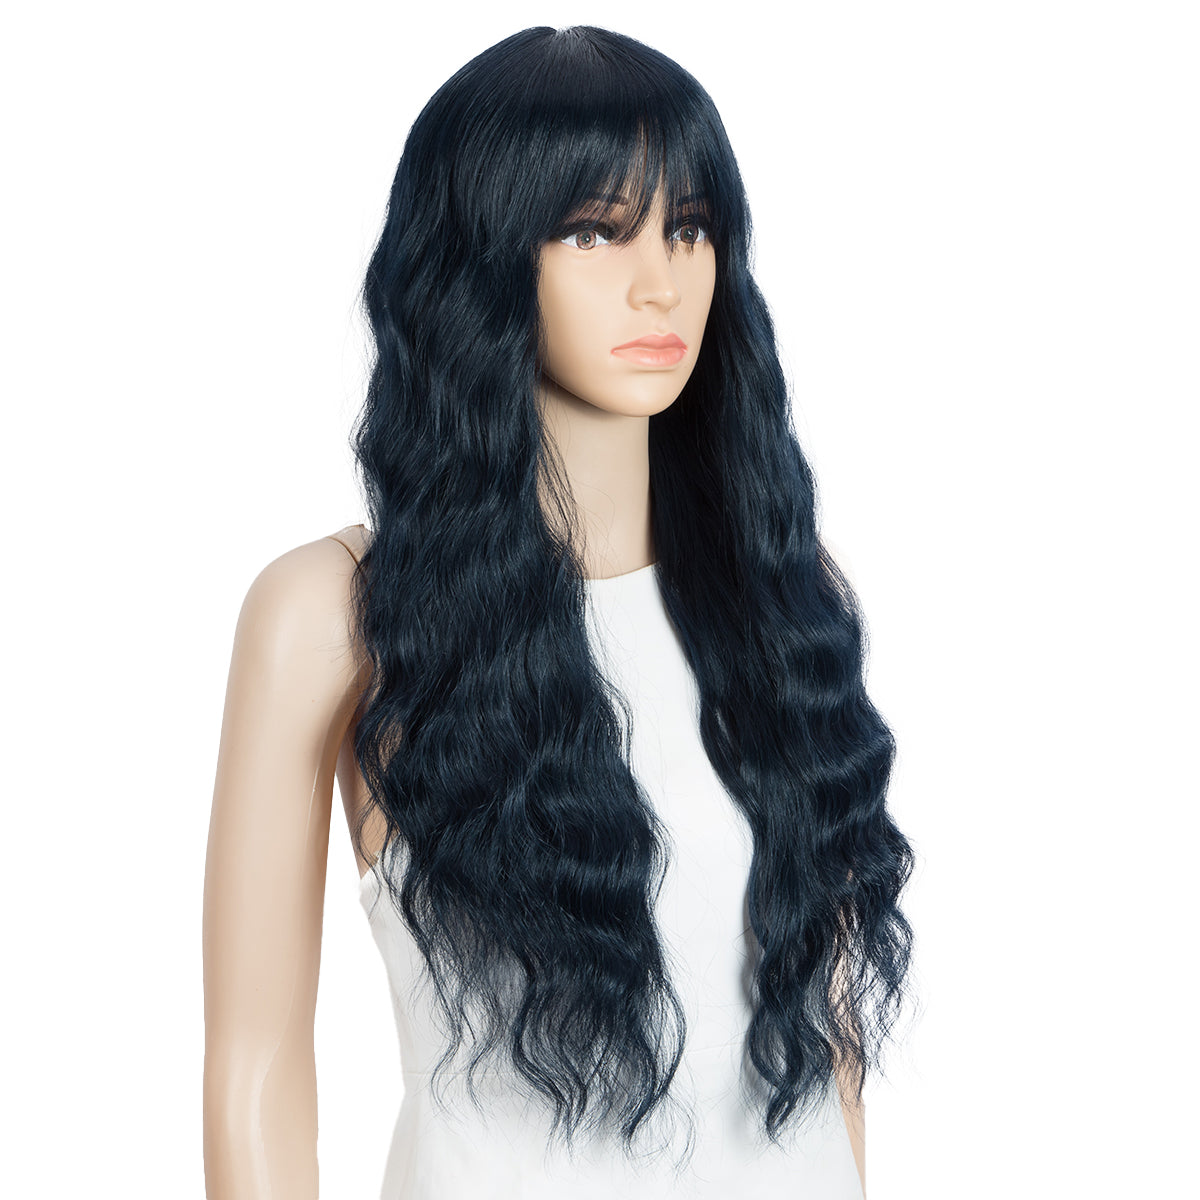 Clearance Sale 26 inch Ombre Blue Color Body Wave Wig